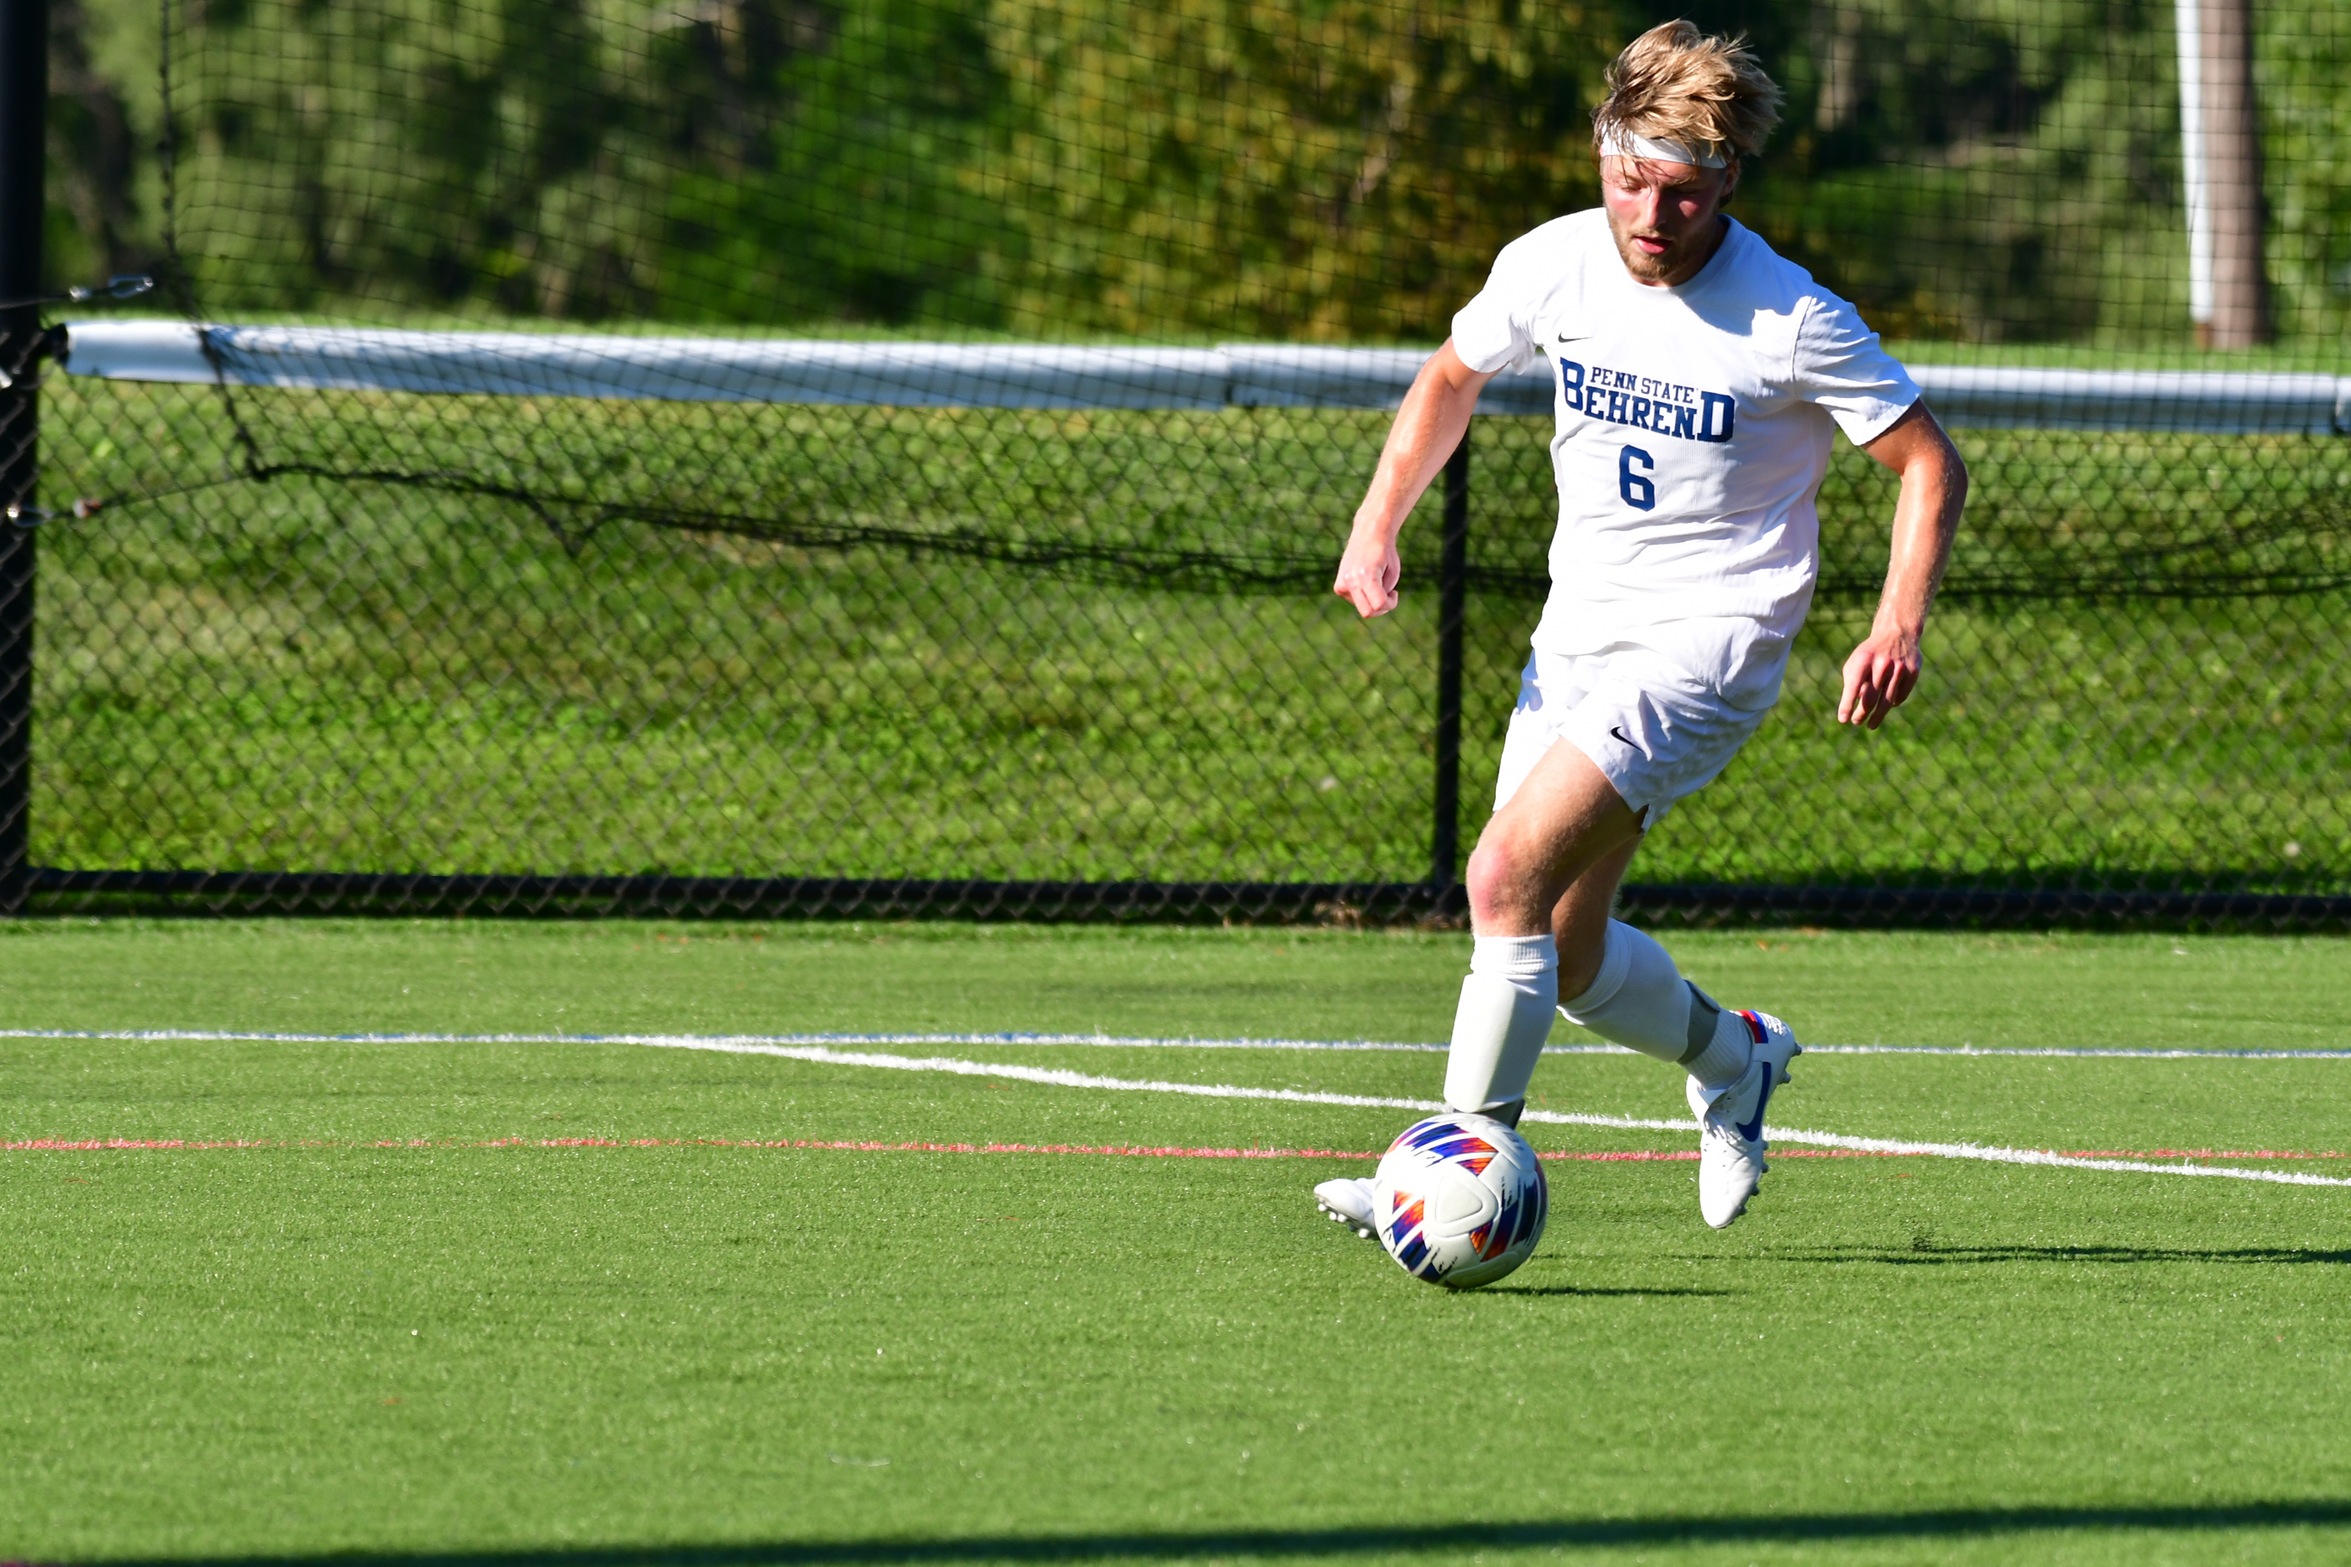 Behrend Nets Four En Route To First Victory